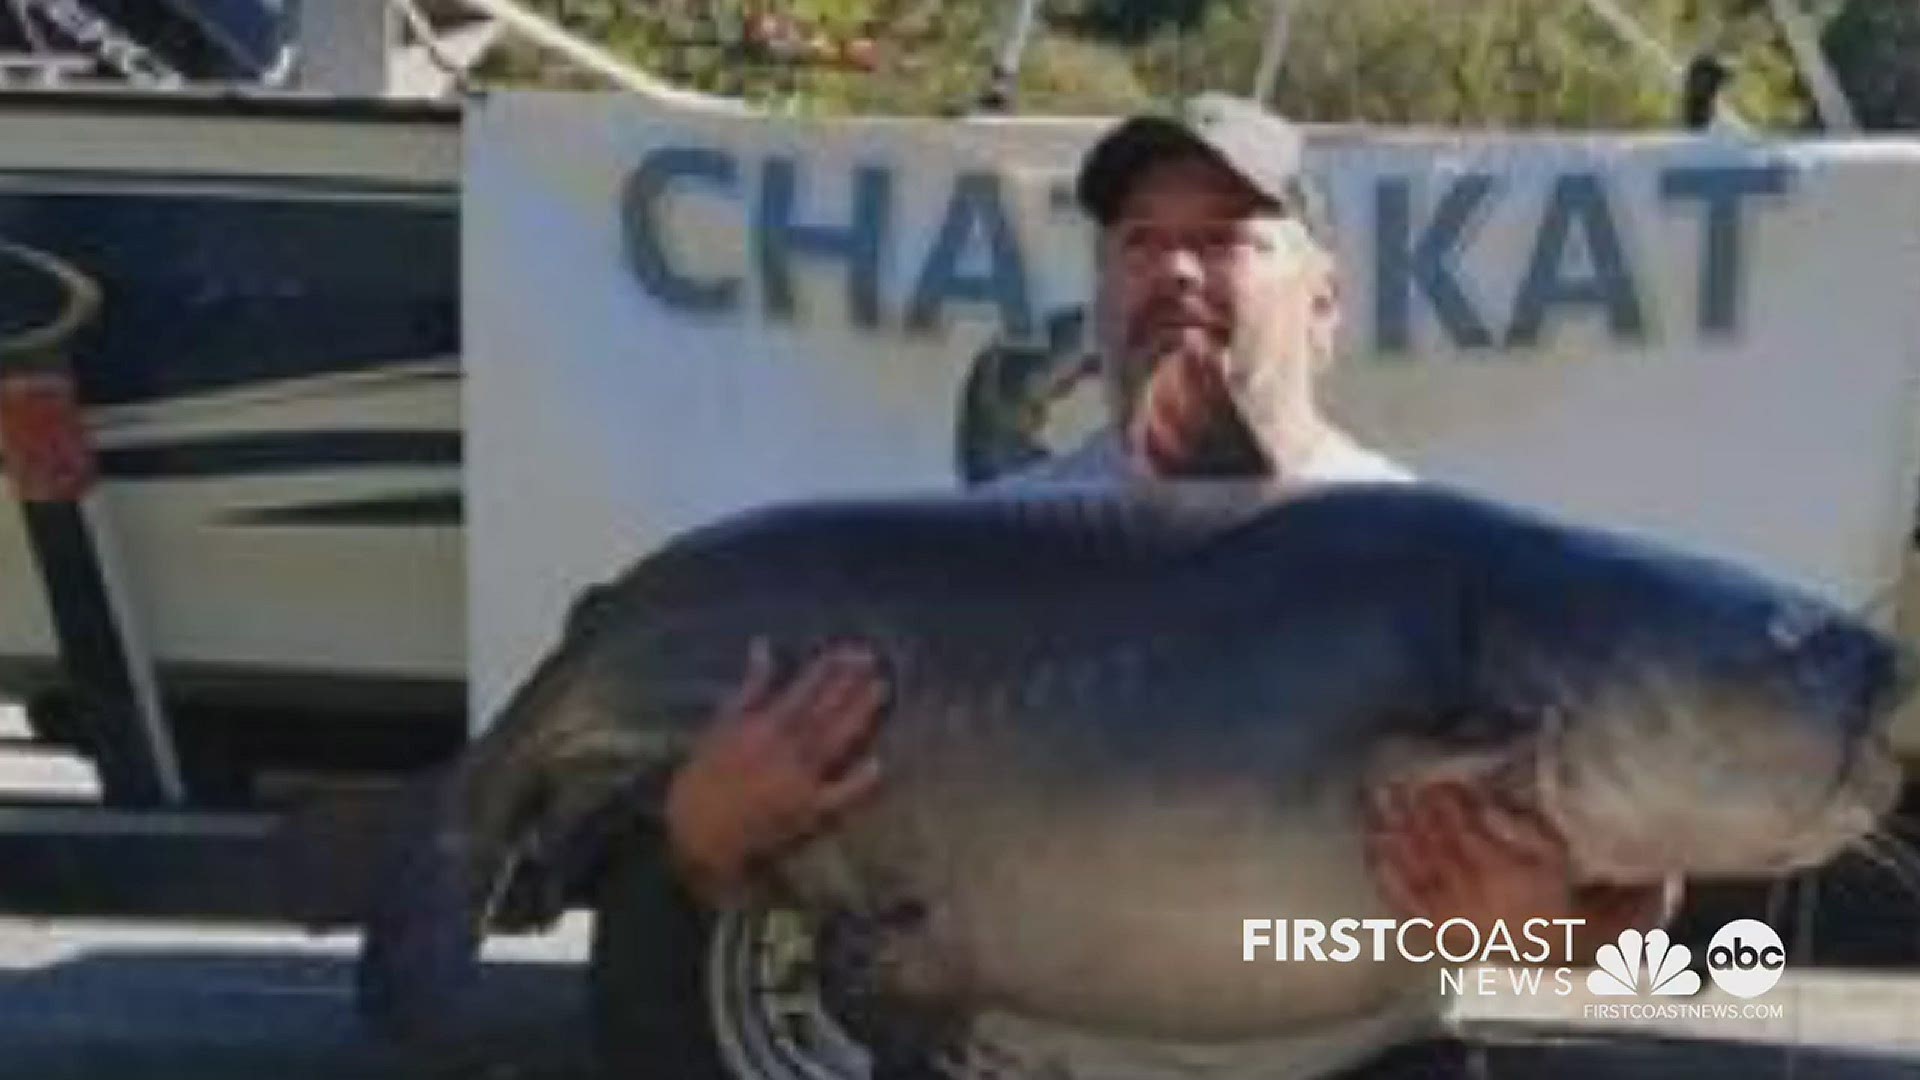 Angler Tim Trone of Havana, Fla. caught this 110 lbs., 6 oz., 58 inch blue catfish in Stewart County, Georgia on the Chattahoochee River on Oct. 17, 2020.